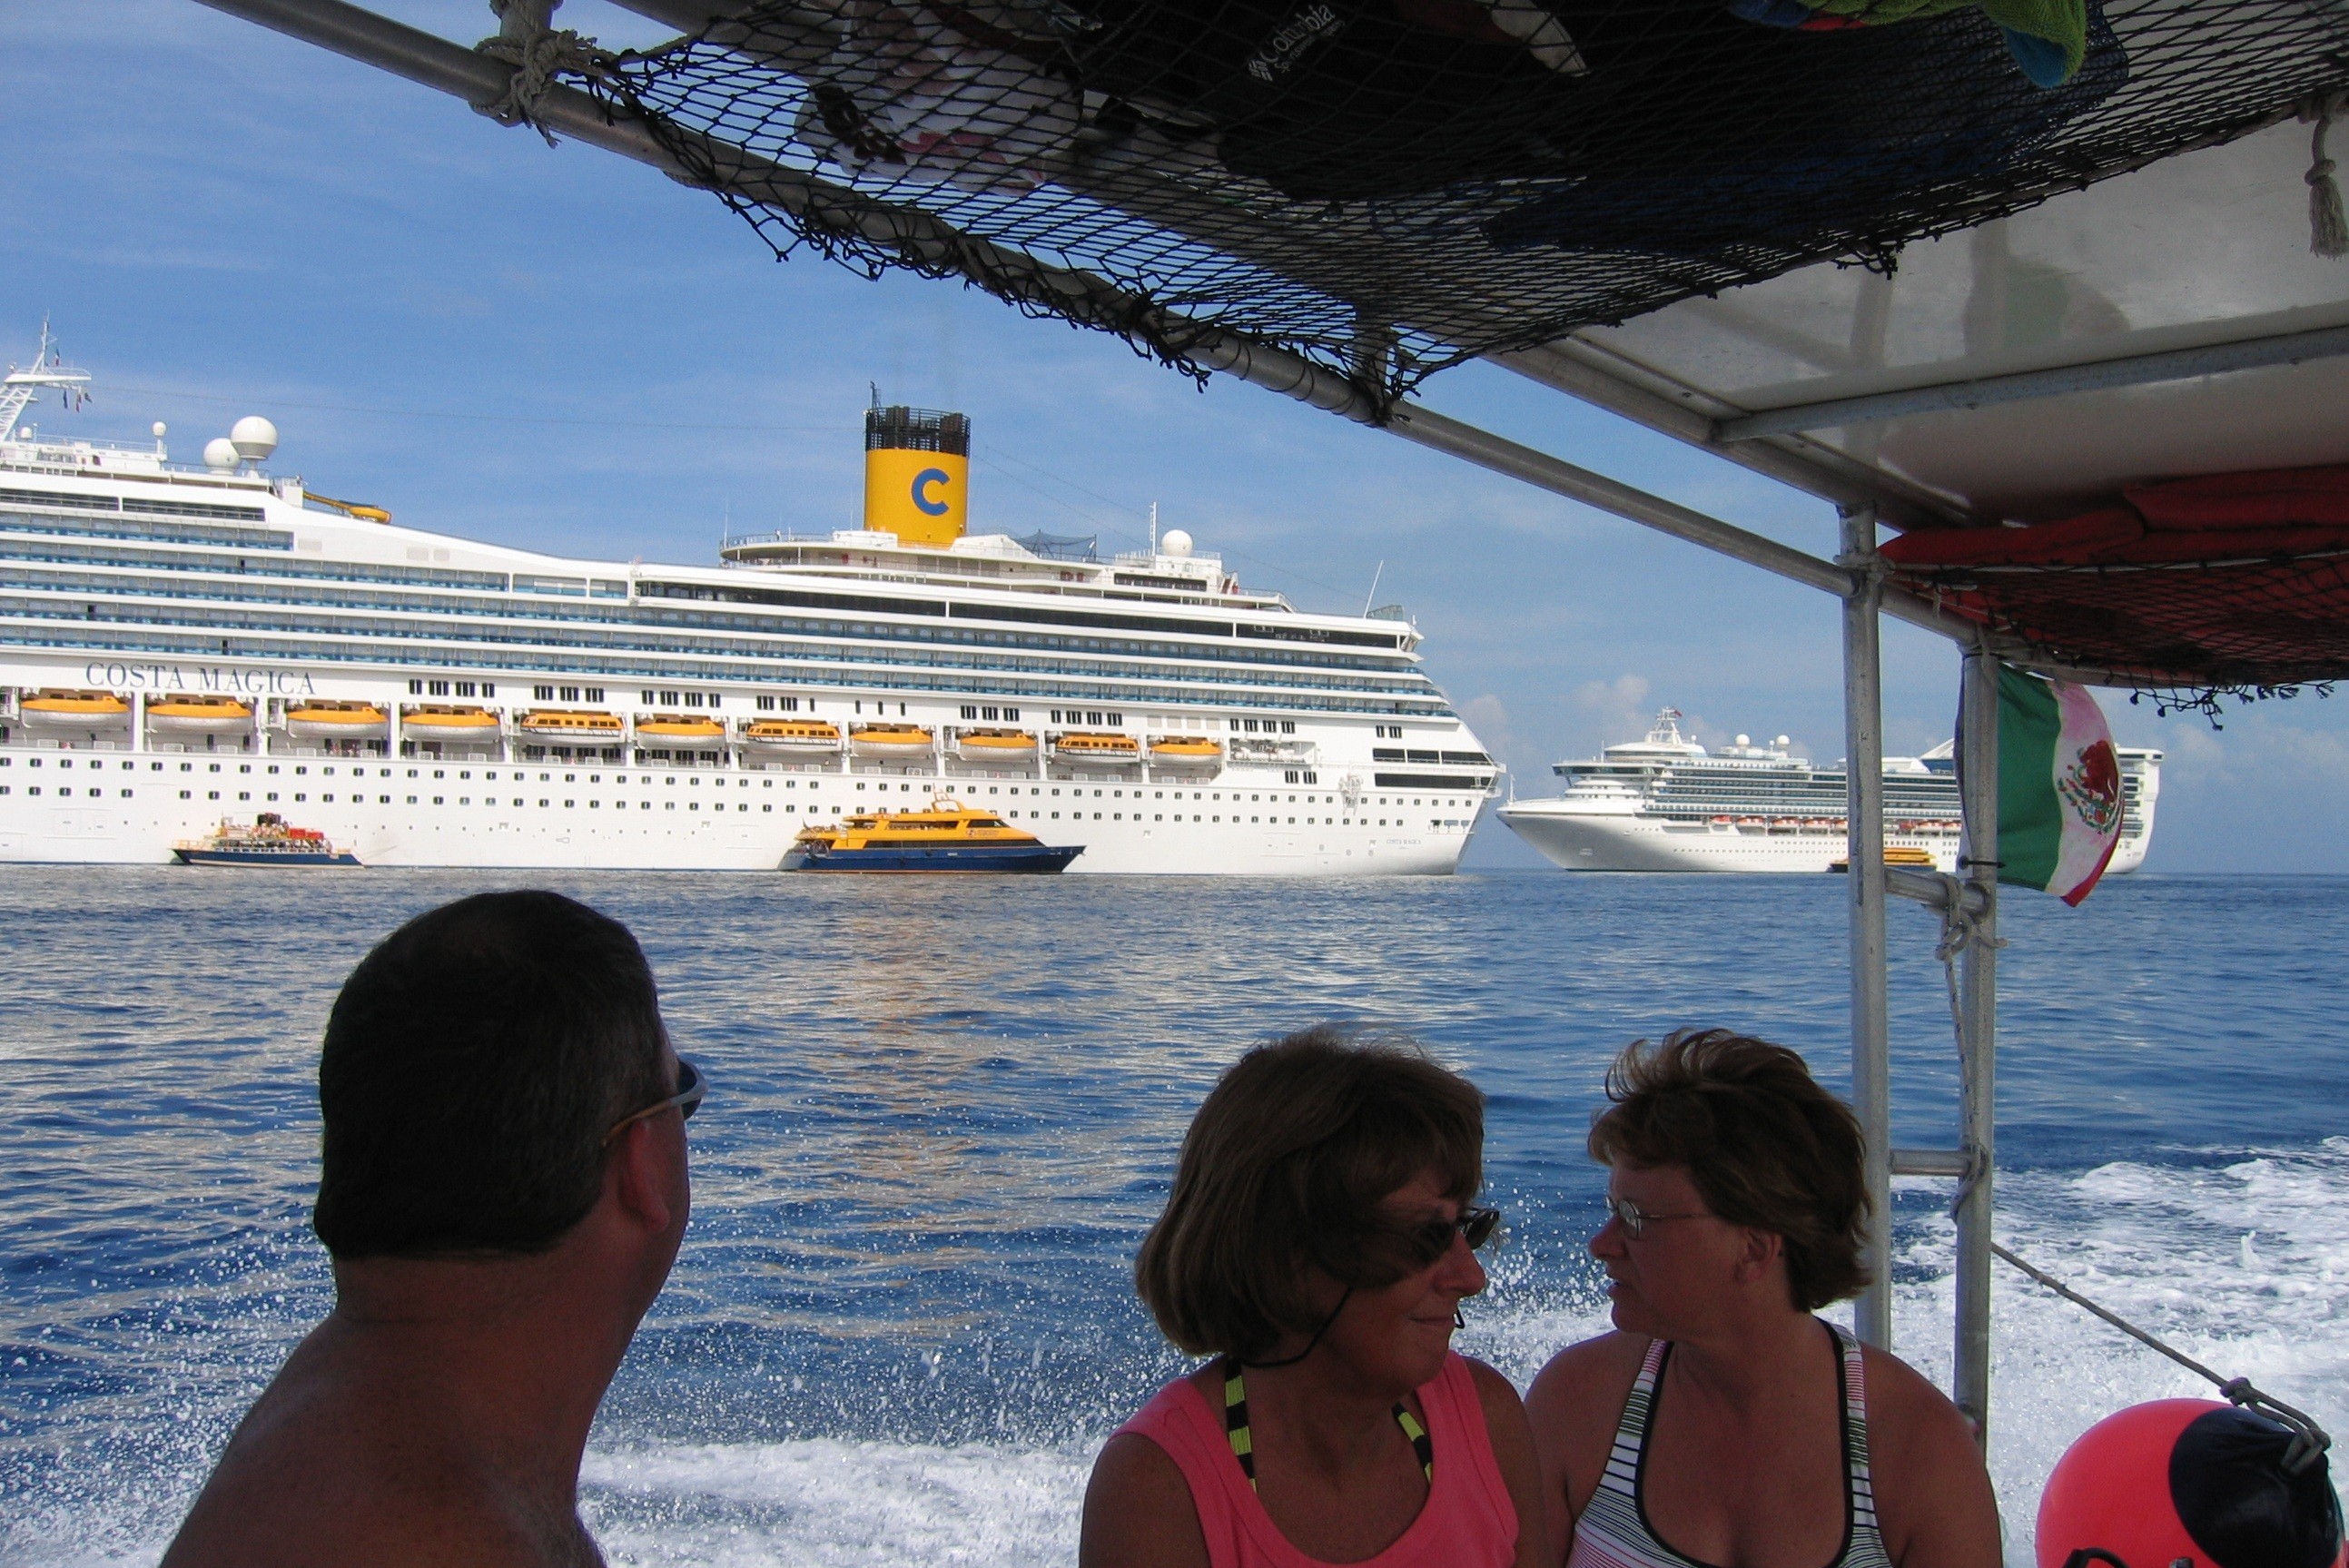 yes there are cruise ships stopping in Cozumel